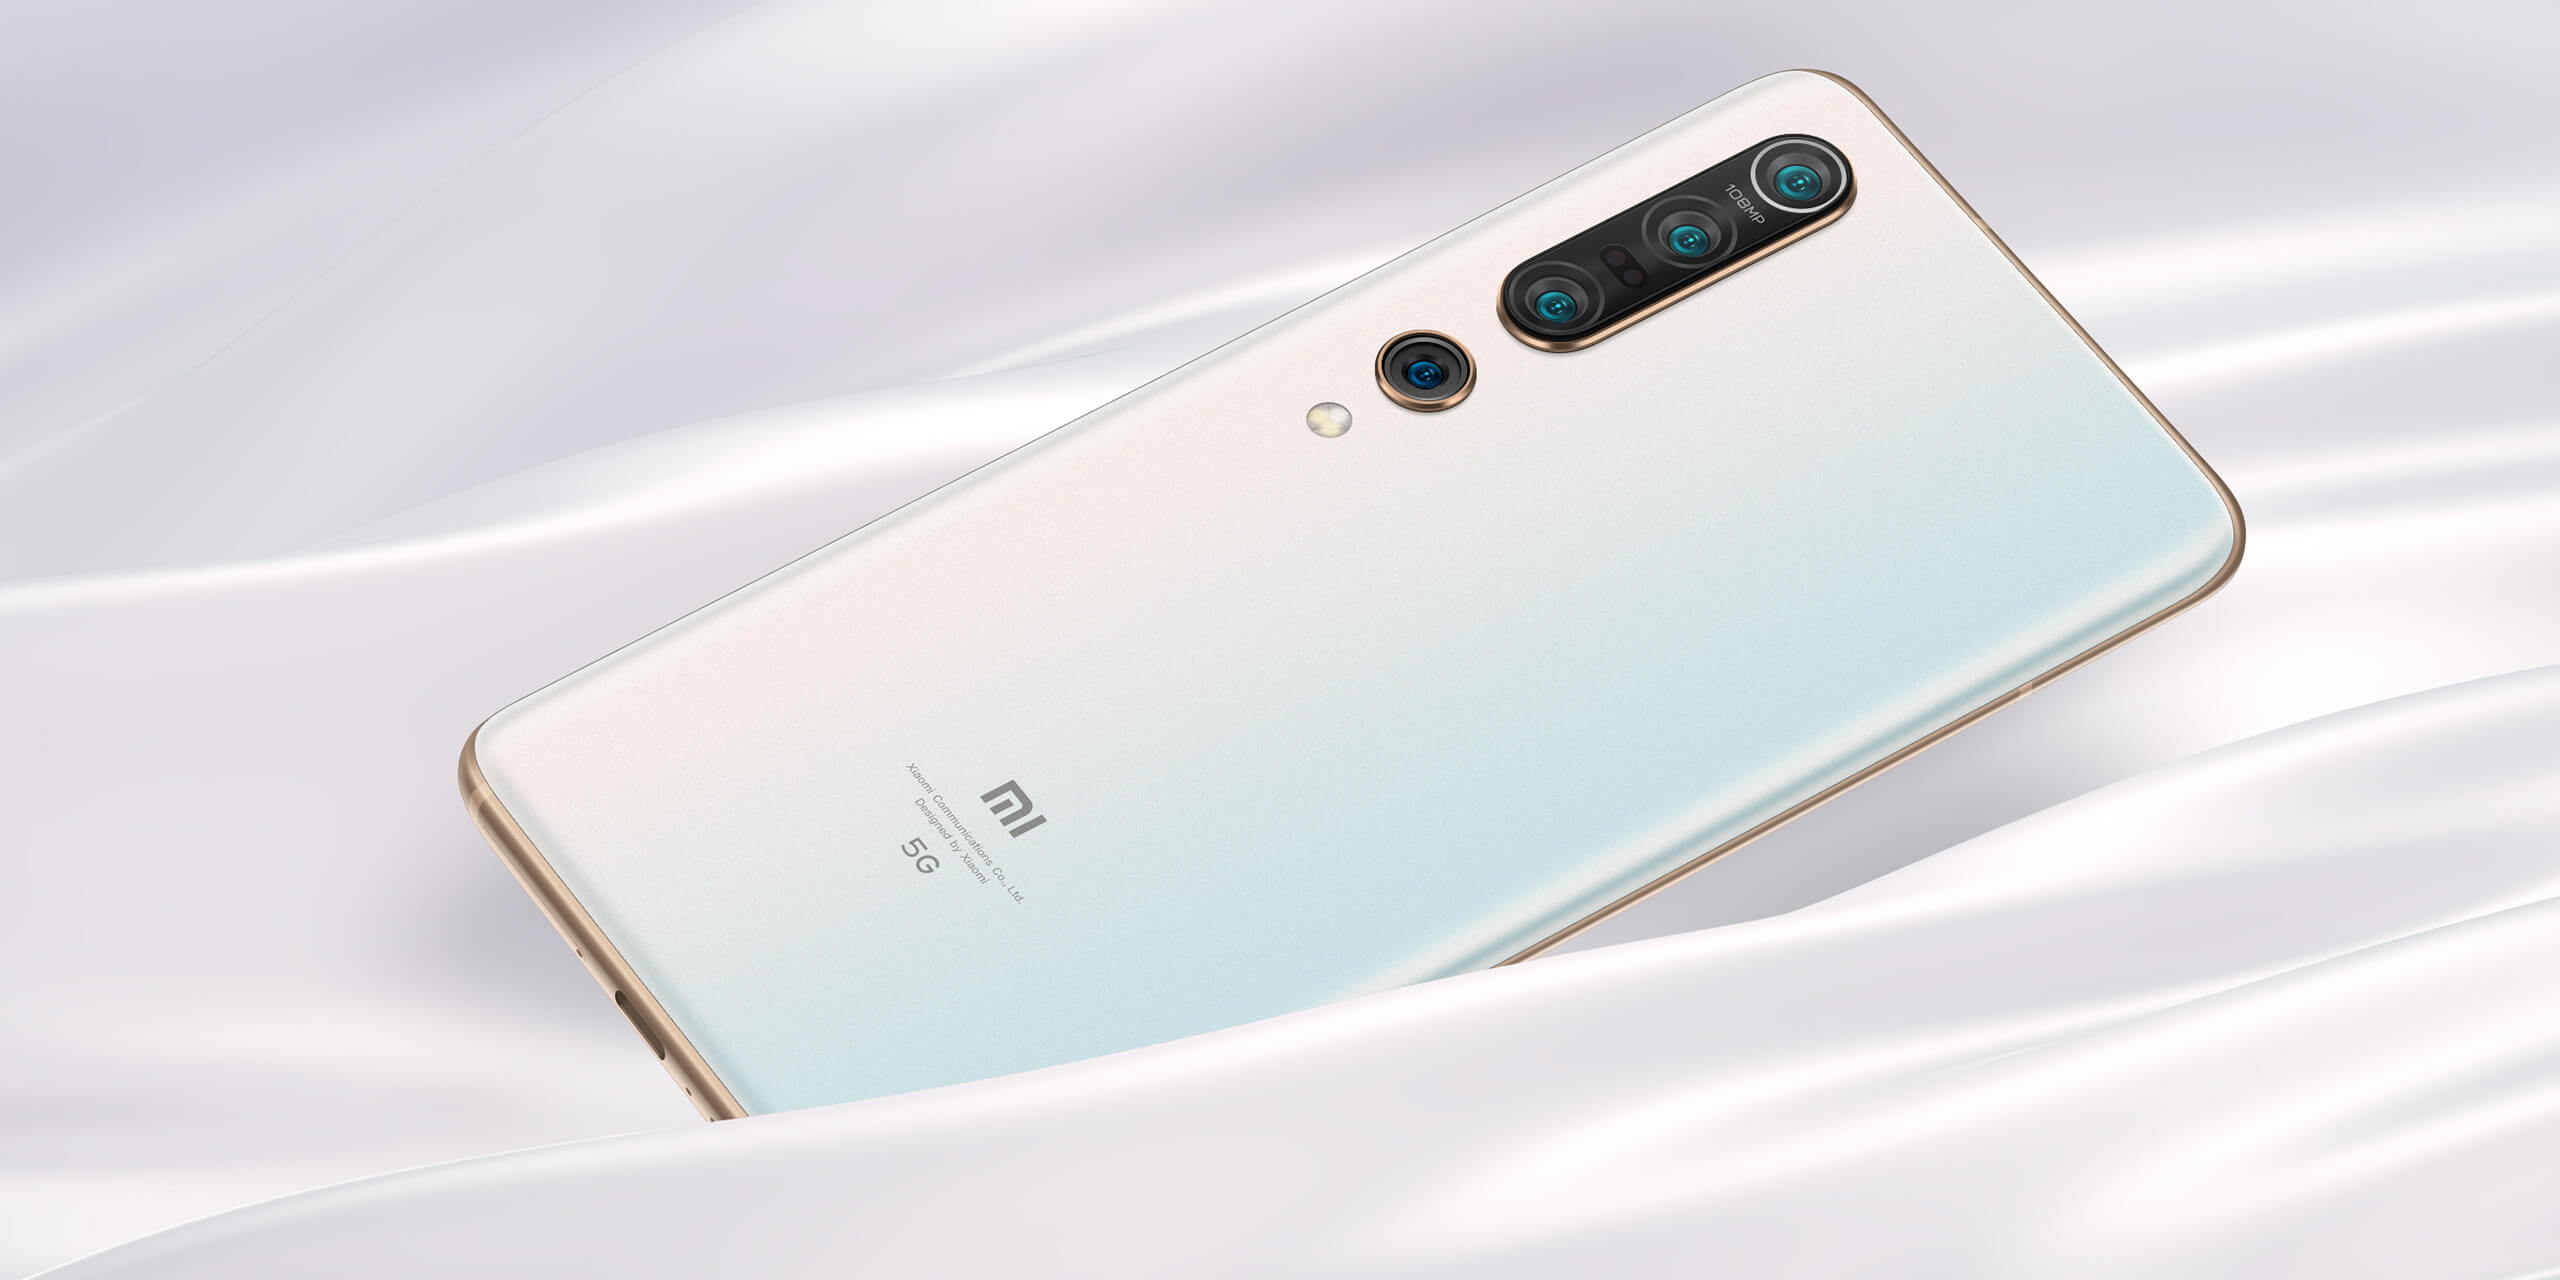 Mi 10 Pro Plus could be the fastest charging smartphone of 2020